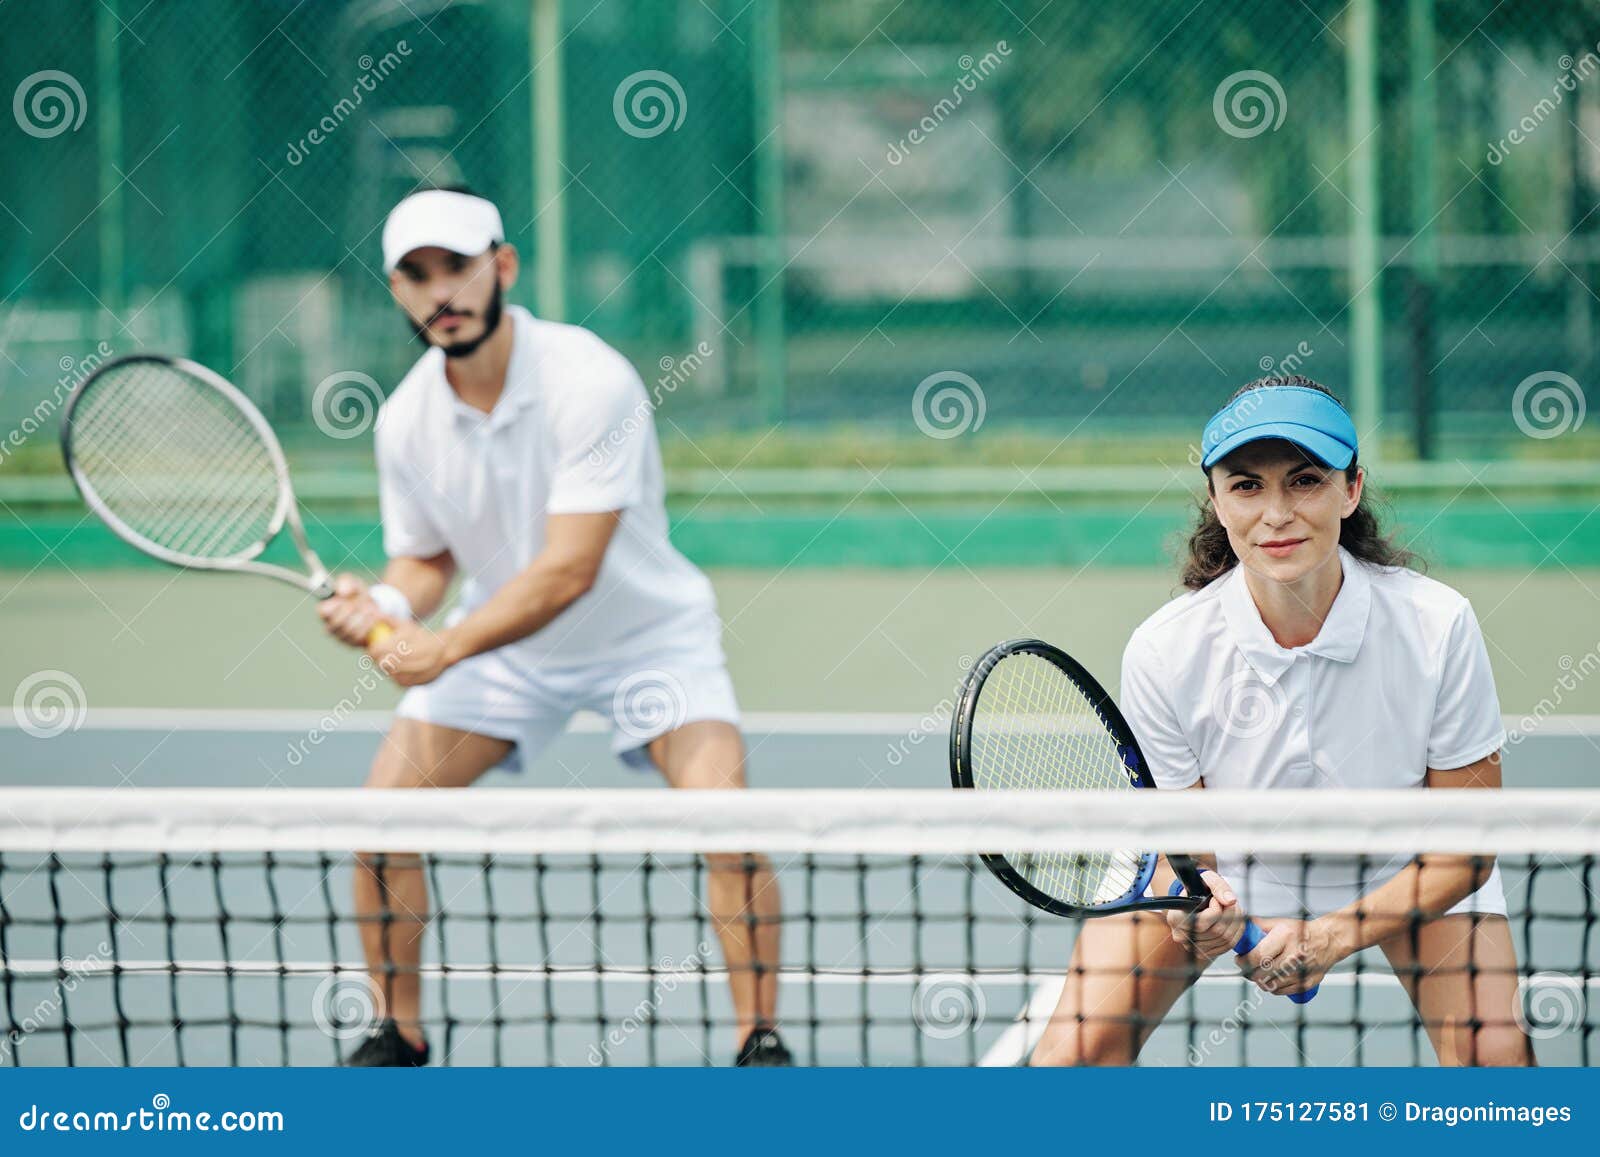 Couple Playing Tennis Stock Image Image Of Practicing 175127581